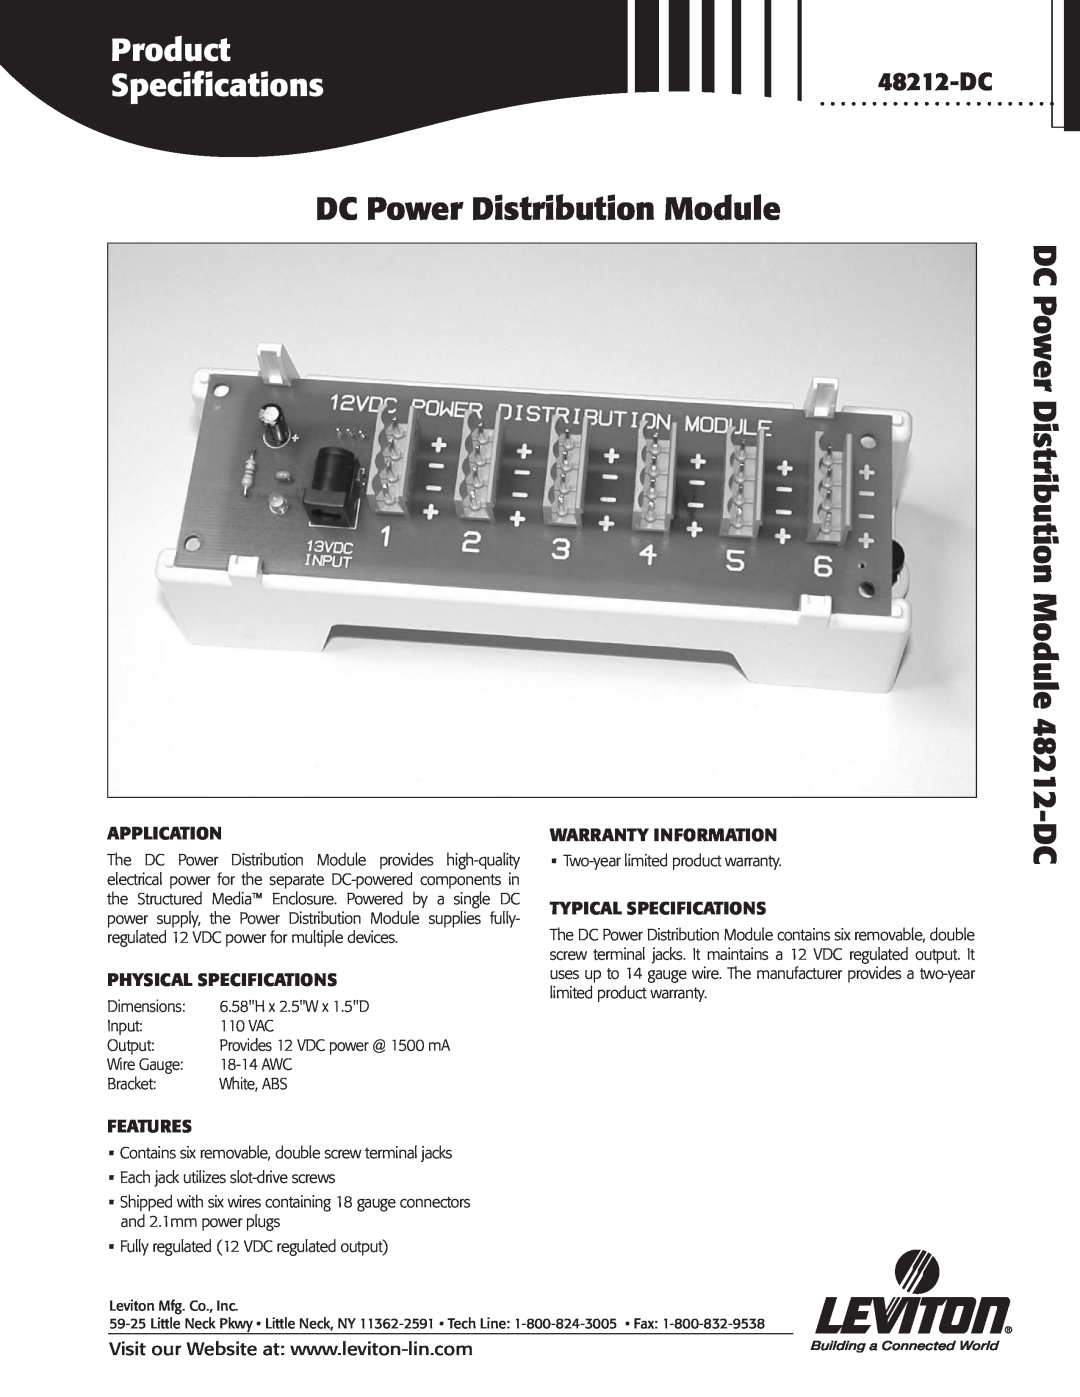 Leviton 48212-DC specifications Application, Physical Specifications, Warranty Information, Typical Specifications 